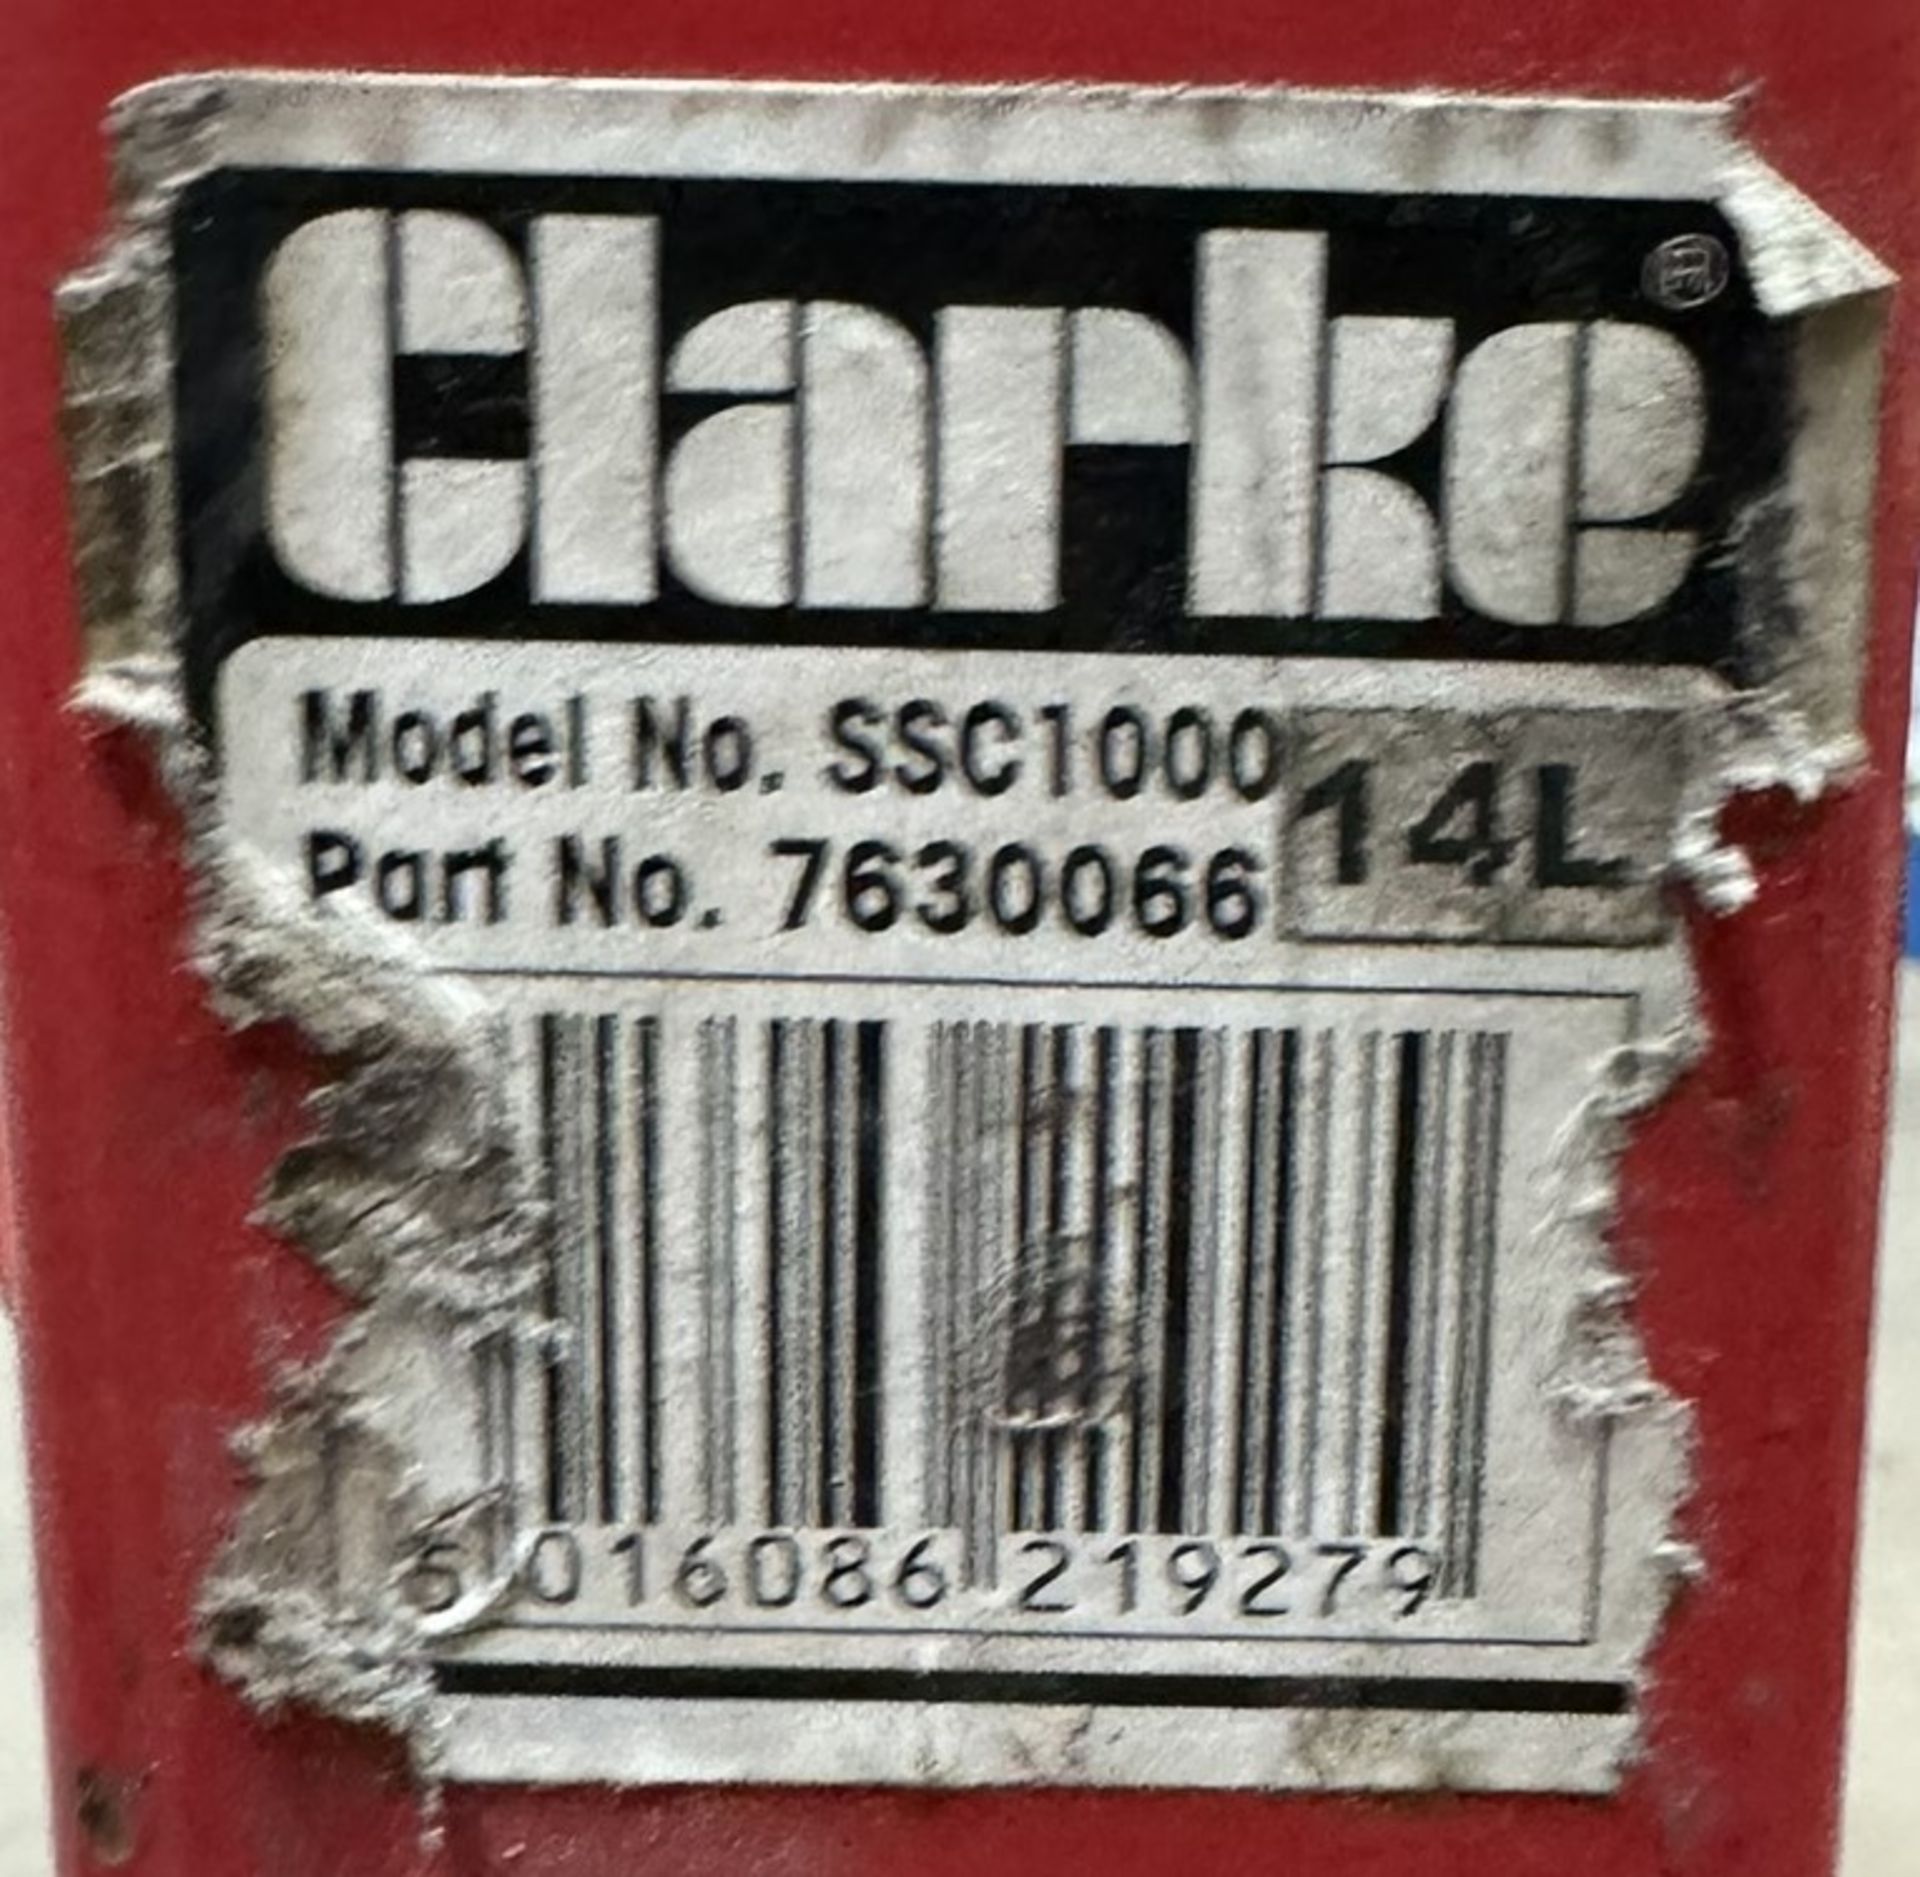 Clarke SSC1000 Hydraulic Coil Spring Compressor - Image 2 of 2